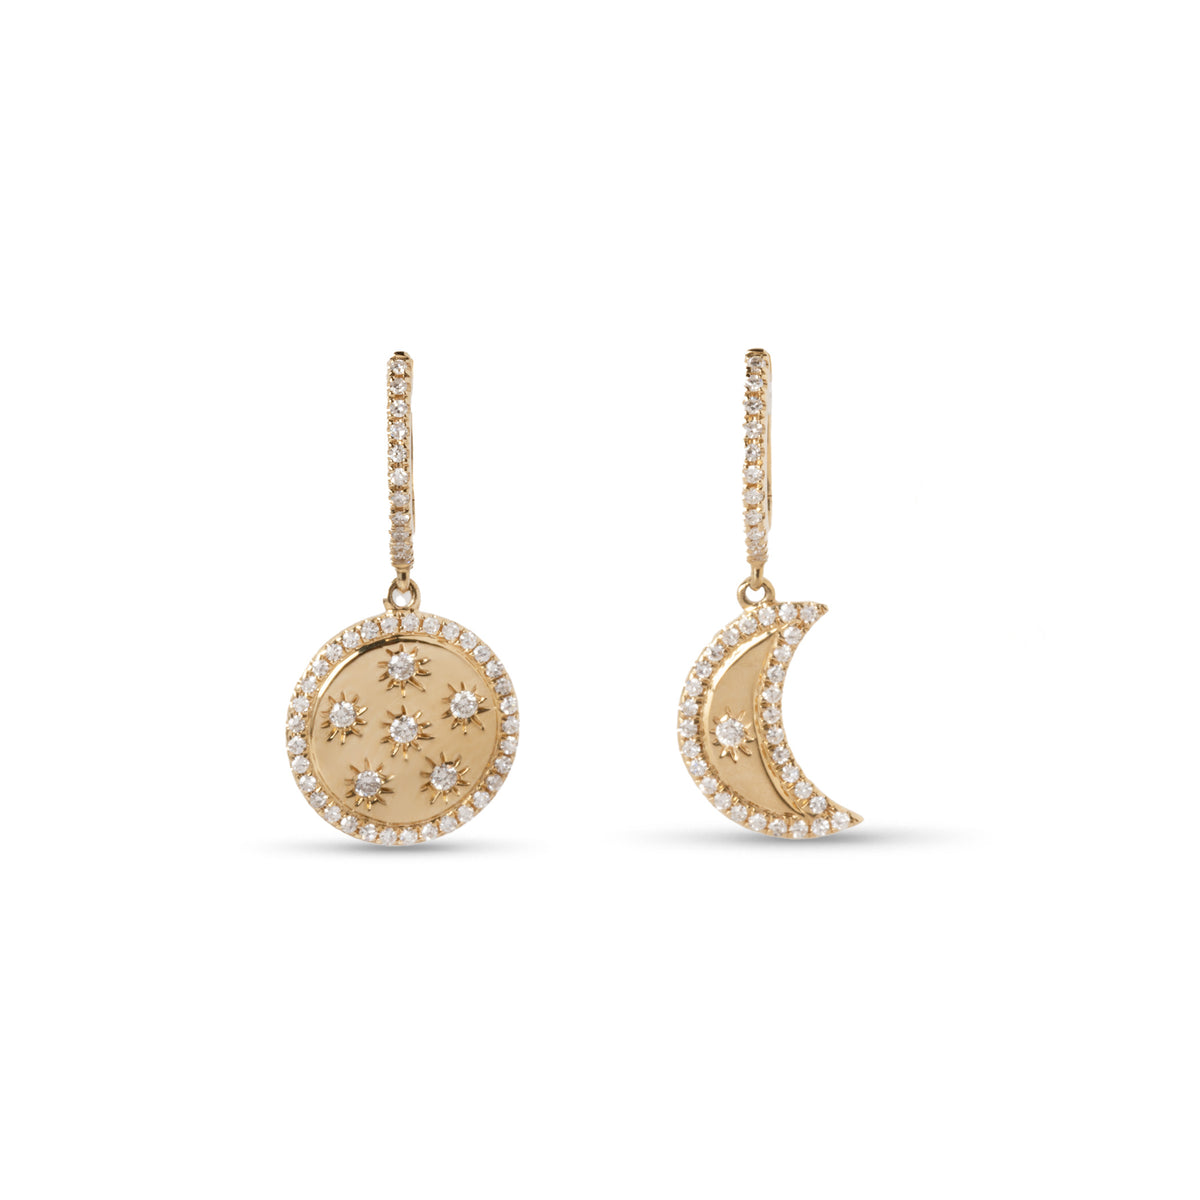 14k yellow gold diamond huggie earrings with pave daimonds and drop disk with stars and drop pave diamond moon